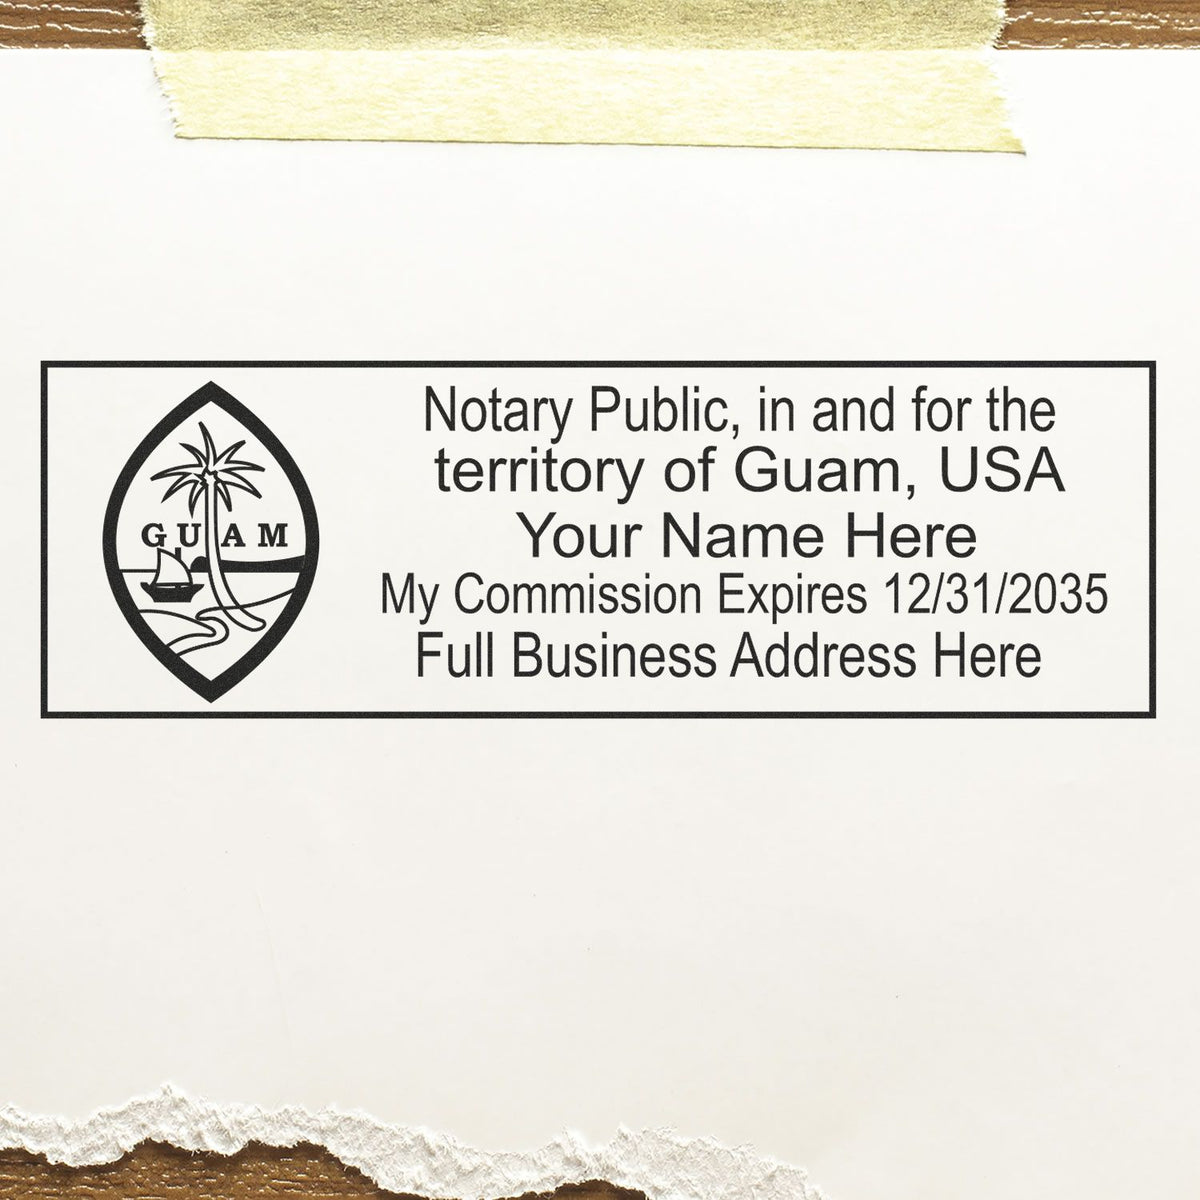 This paper is stamped with a sample imprint of the Super Slim Guam Notary Public Stamp, signifying its quality and reliability.